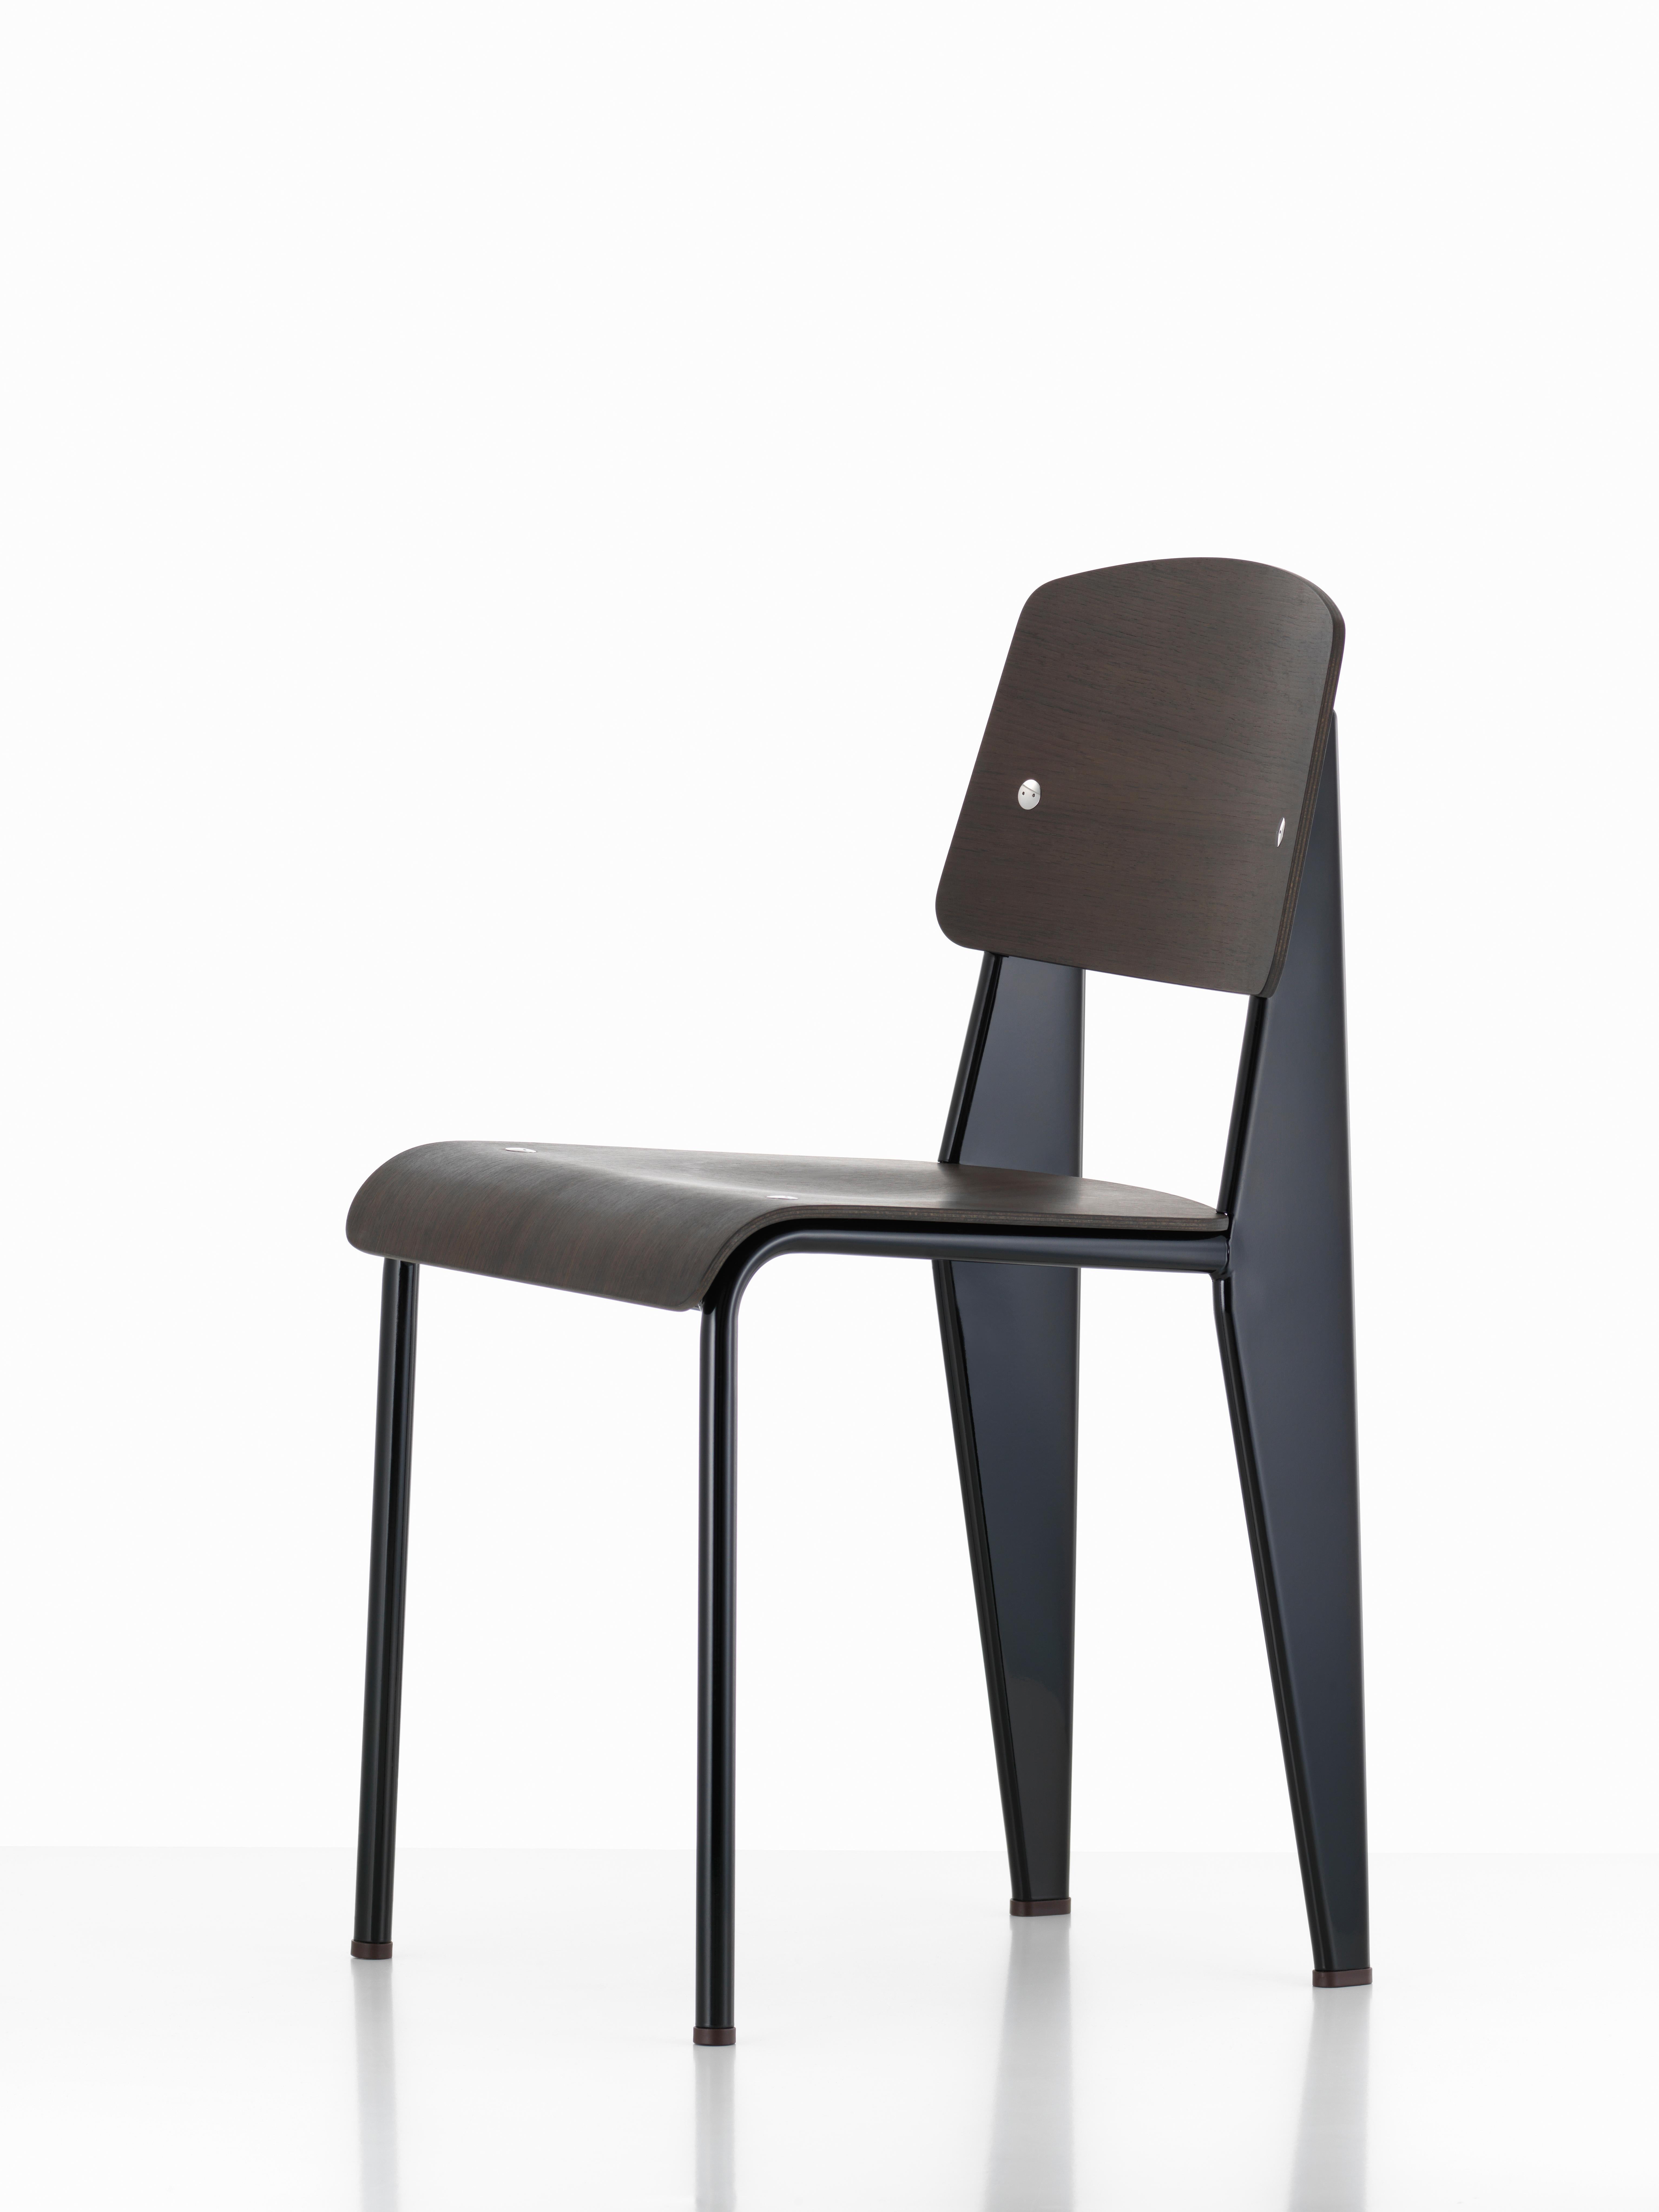 Contemporary Jean Prouvé Standard Chair in Dark Oak and Black Metal for Vitra